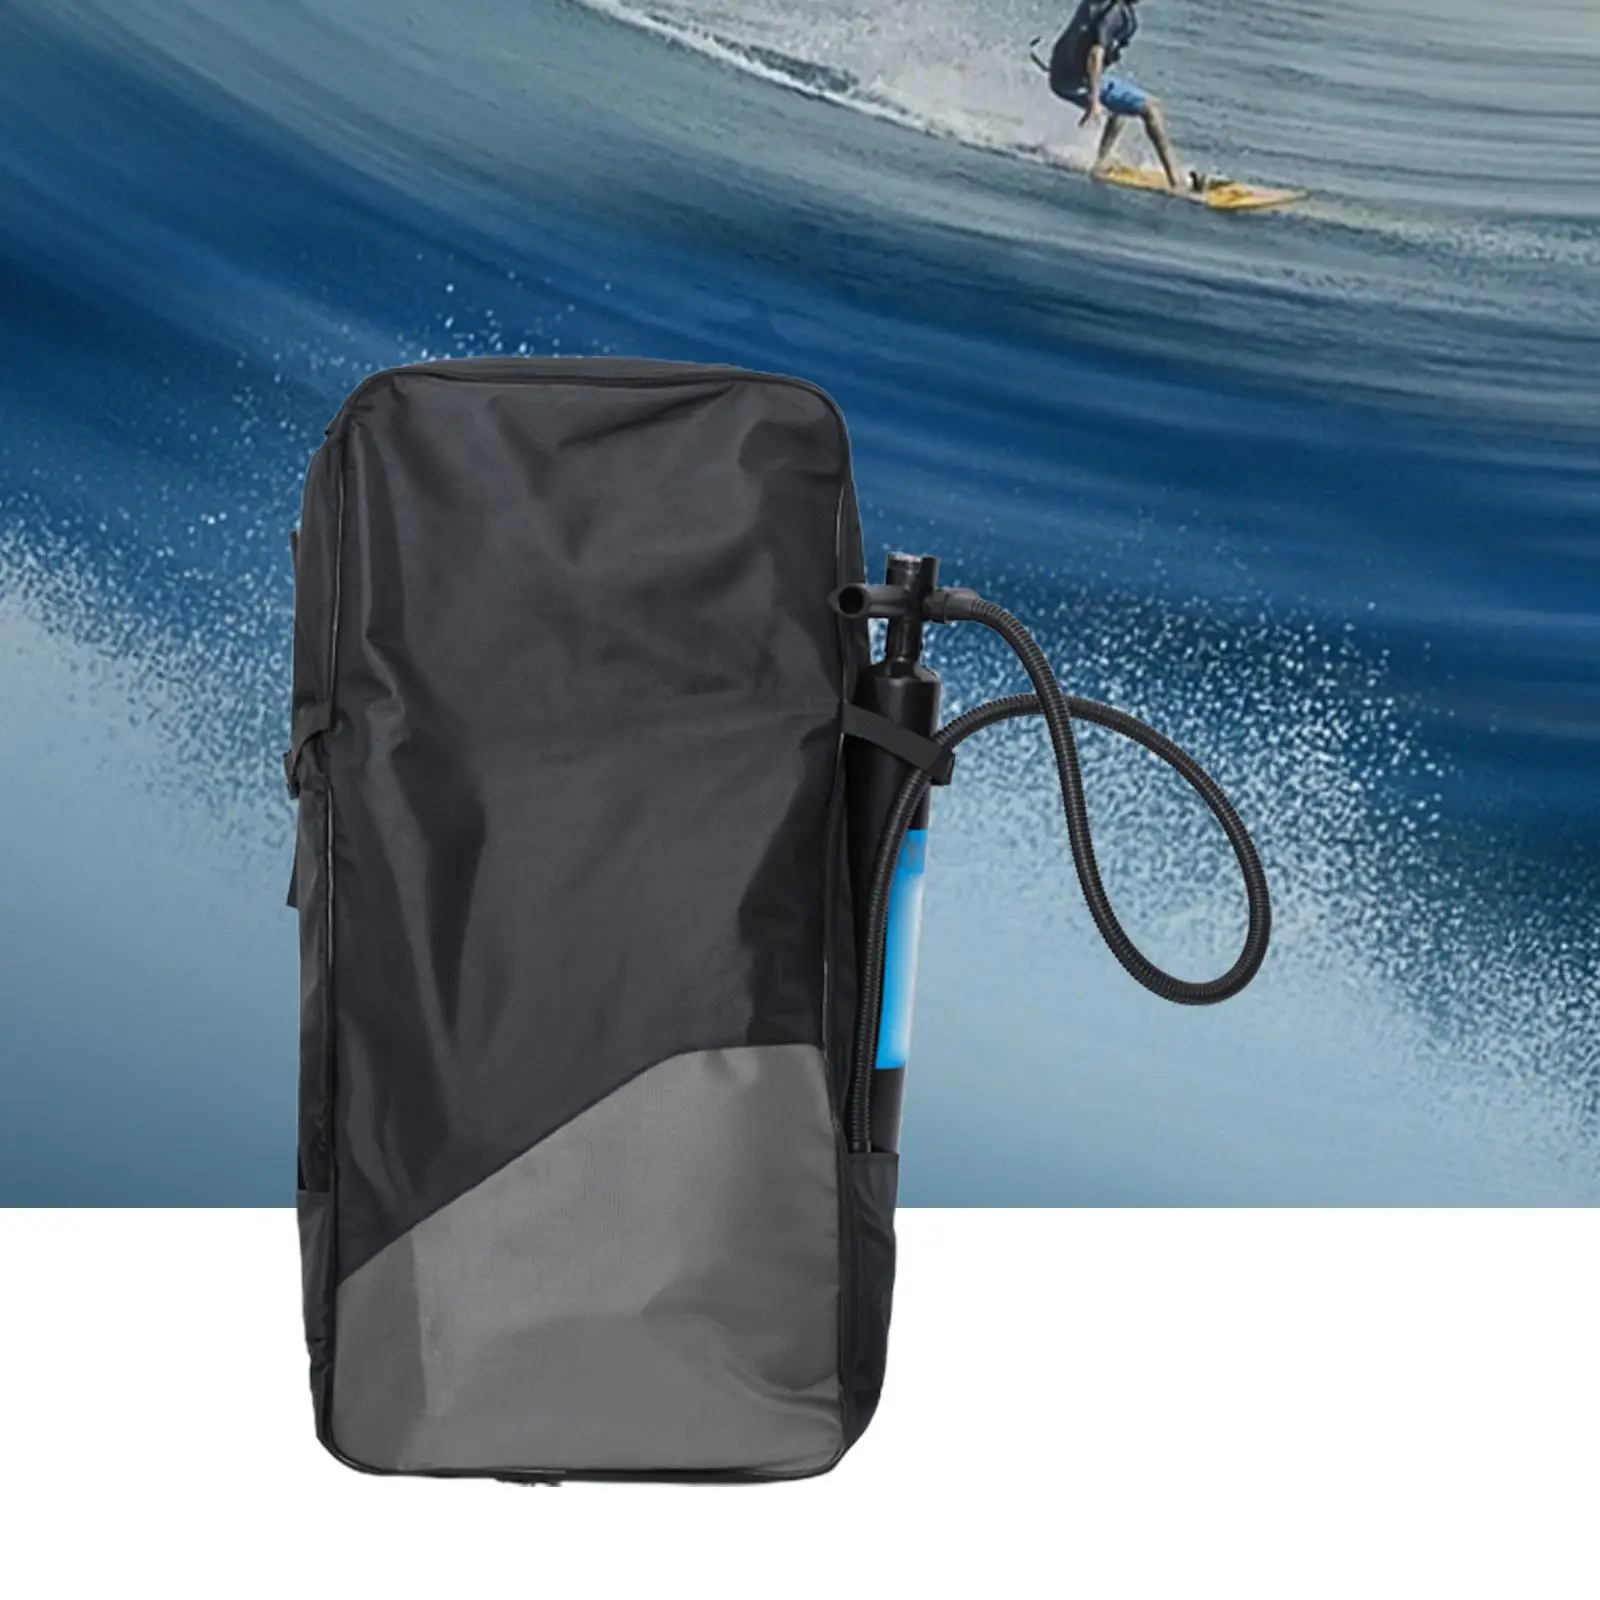 Surfboard Travel Bag Stand up Paddle Board Travel Bag Accessories Paddleboard Carry Backpack for Water Sports Kayaking Surfboard